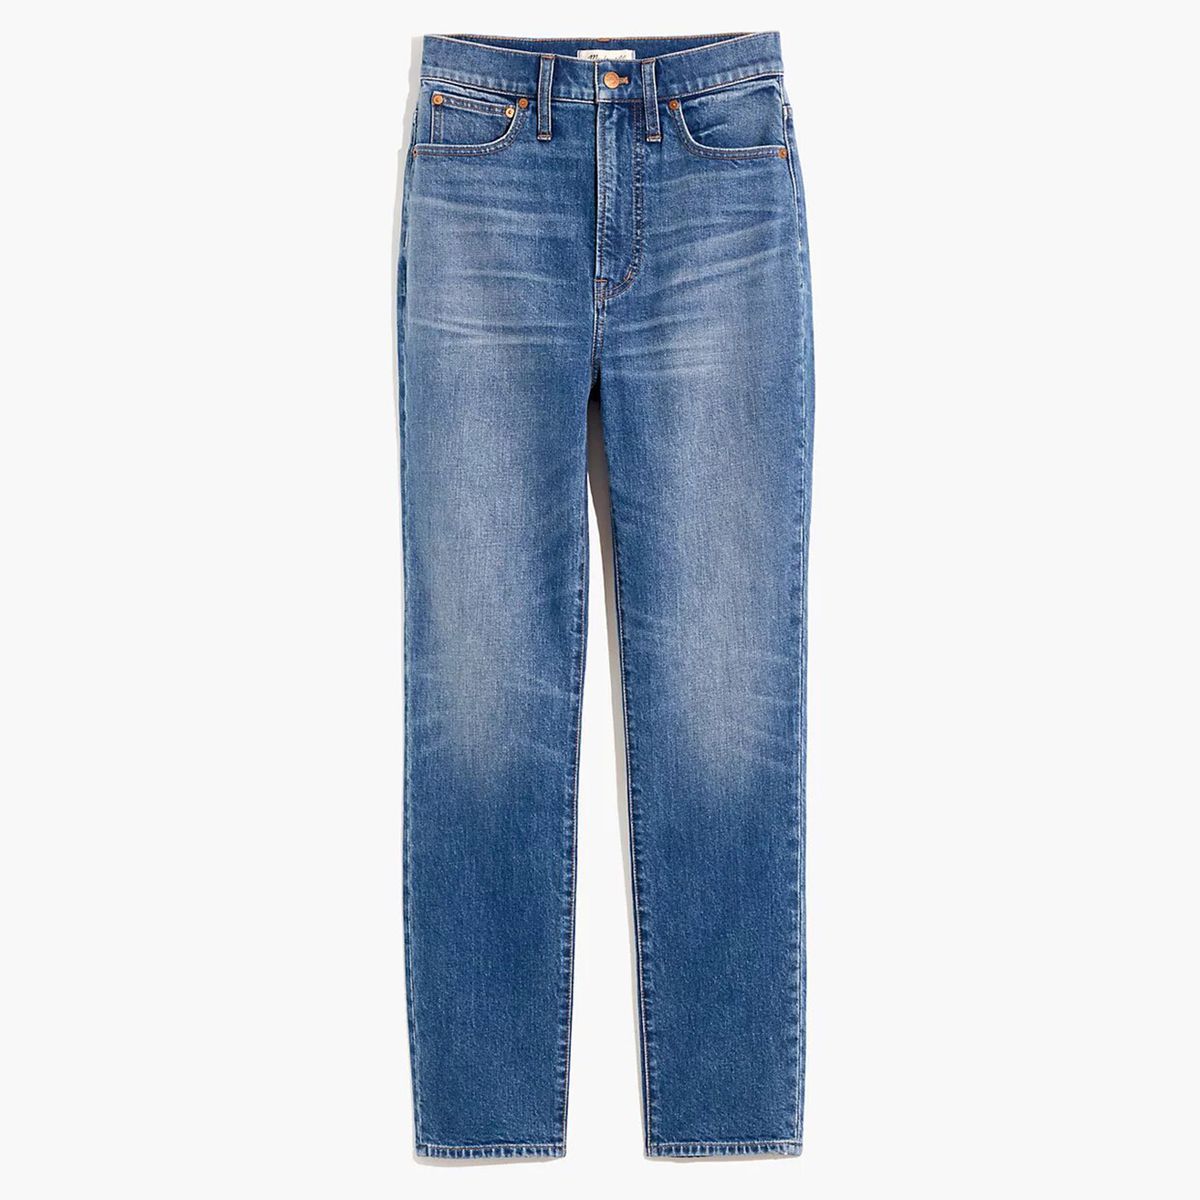 Madewell’s $75 Jeans Sale: Flattering Denim Perfect for Fall | InStyle